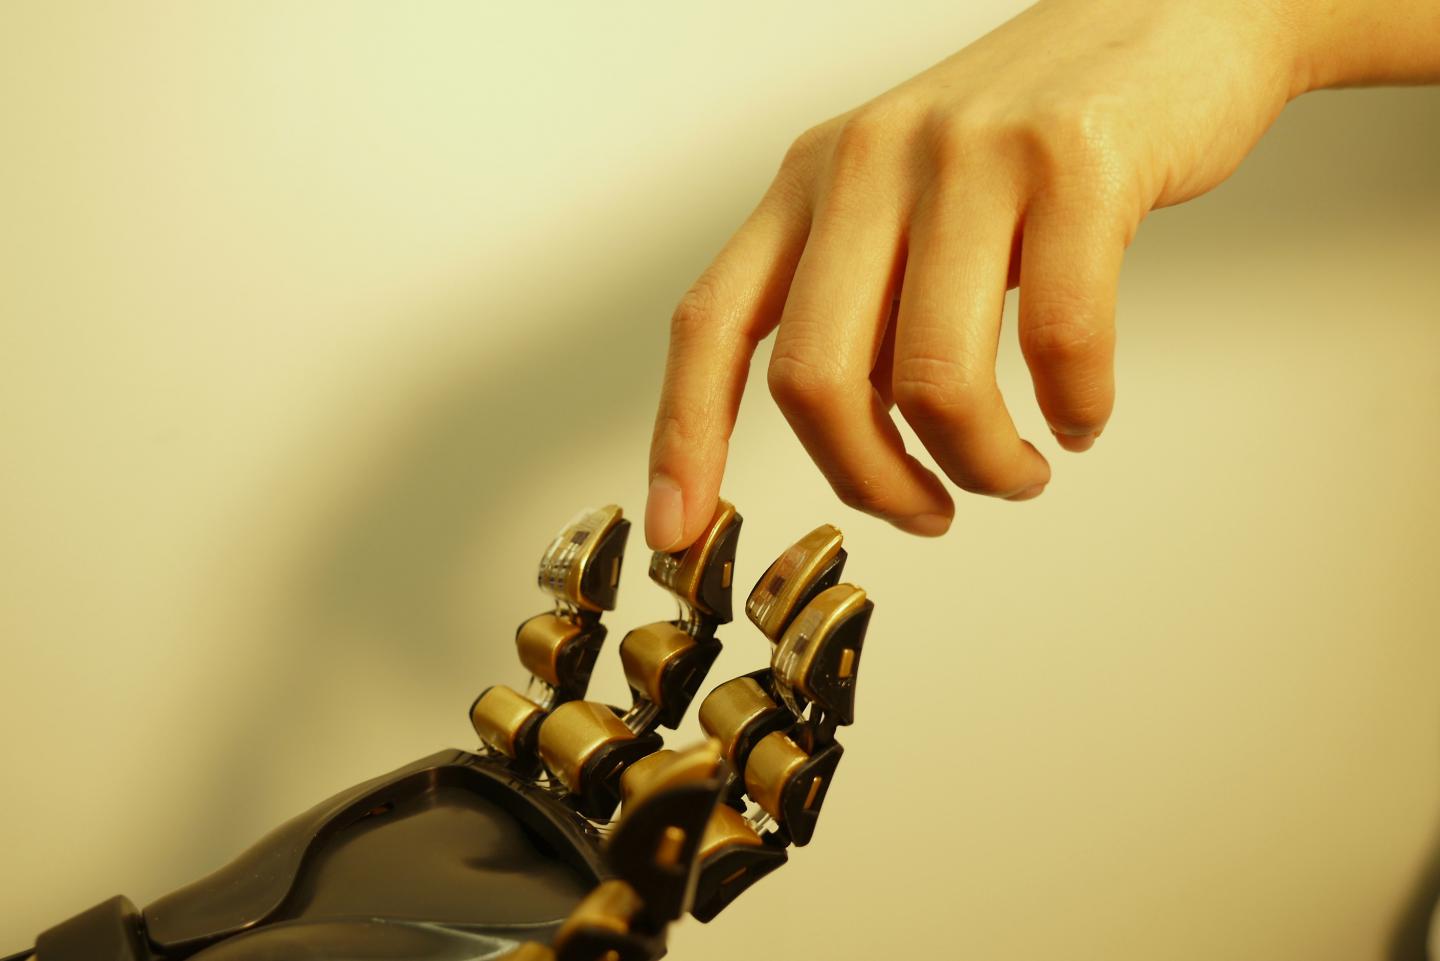 Artificial 'Skin' Could Provide Prosthetics with Sensation (7 of 8)